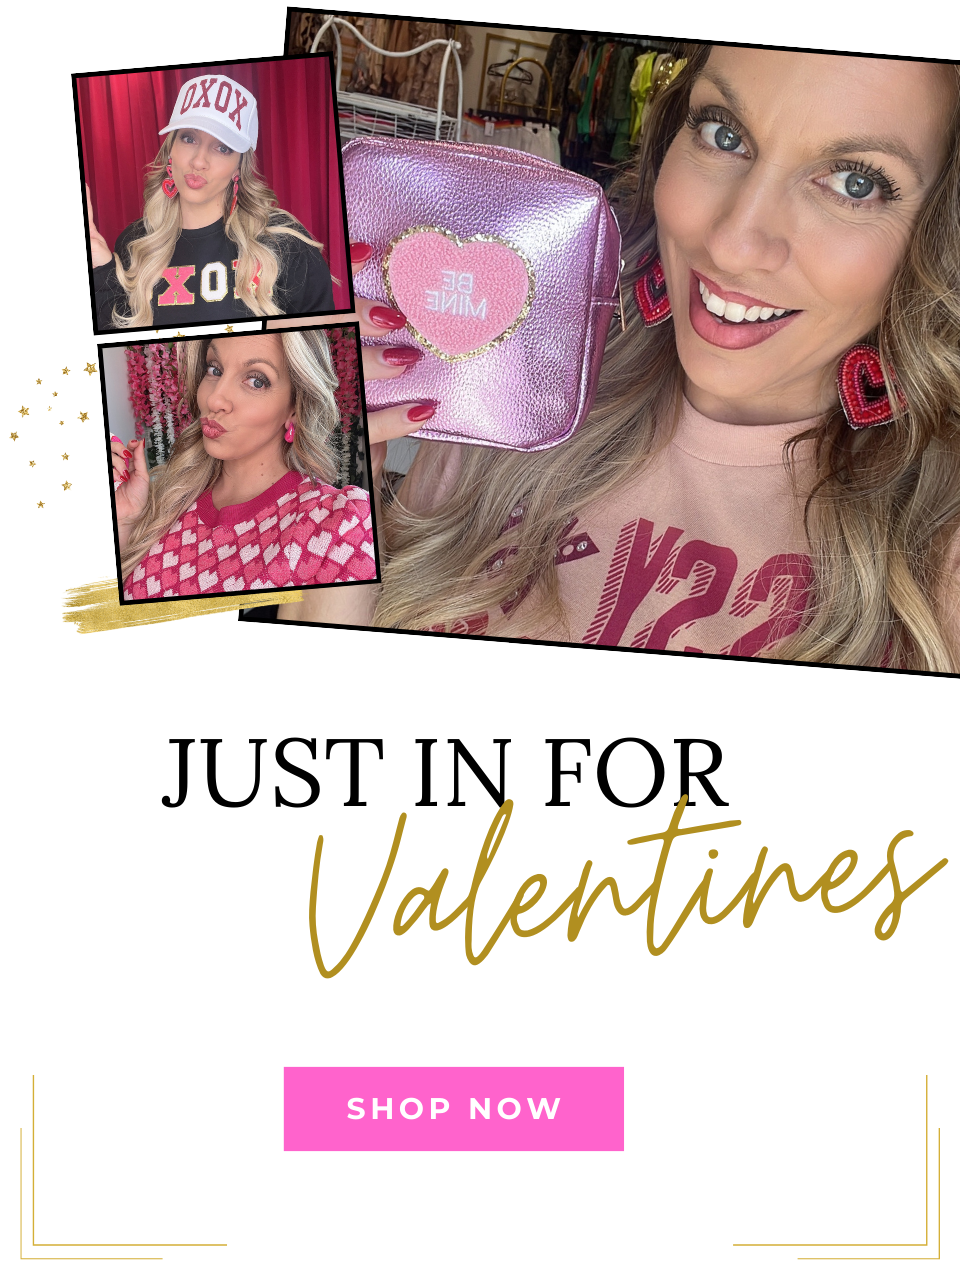 Just in for Valentines - Outfits, Accessories, and more!